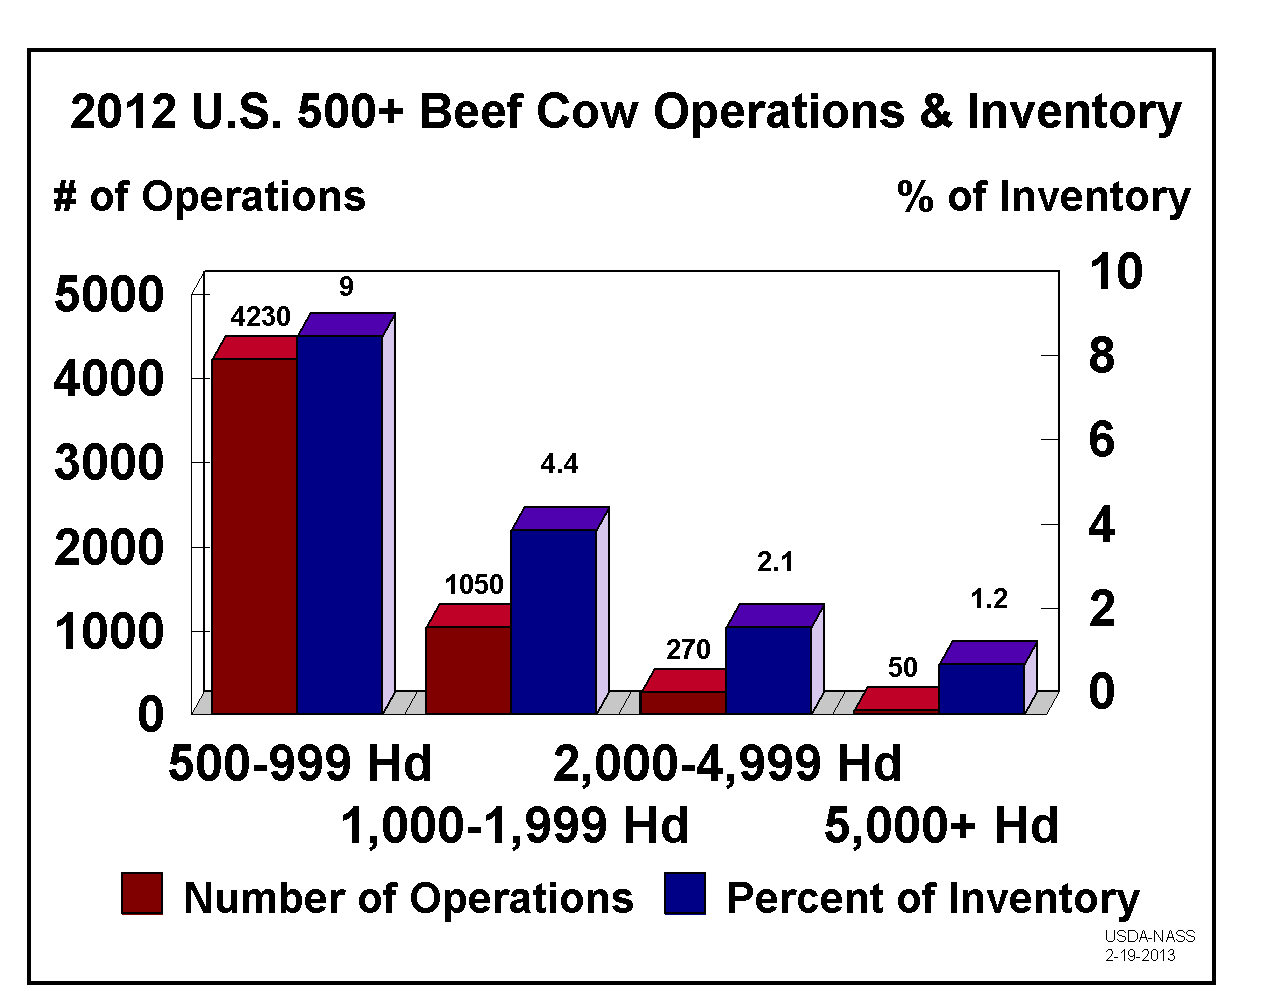 Beef Cows: Operations and Inventory by 500+ Head Size Group, US